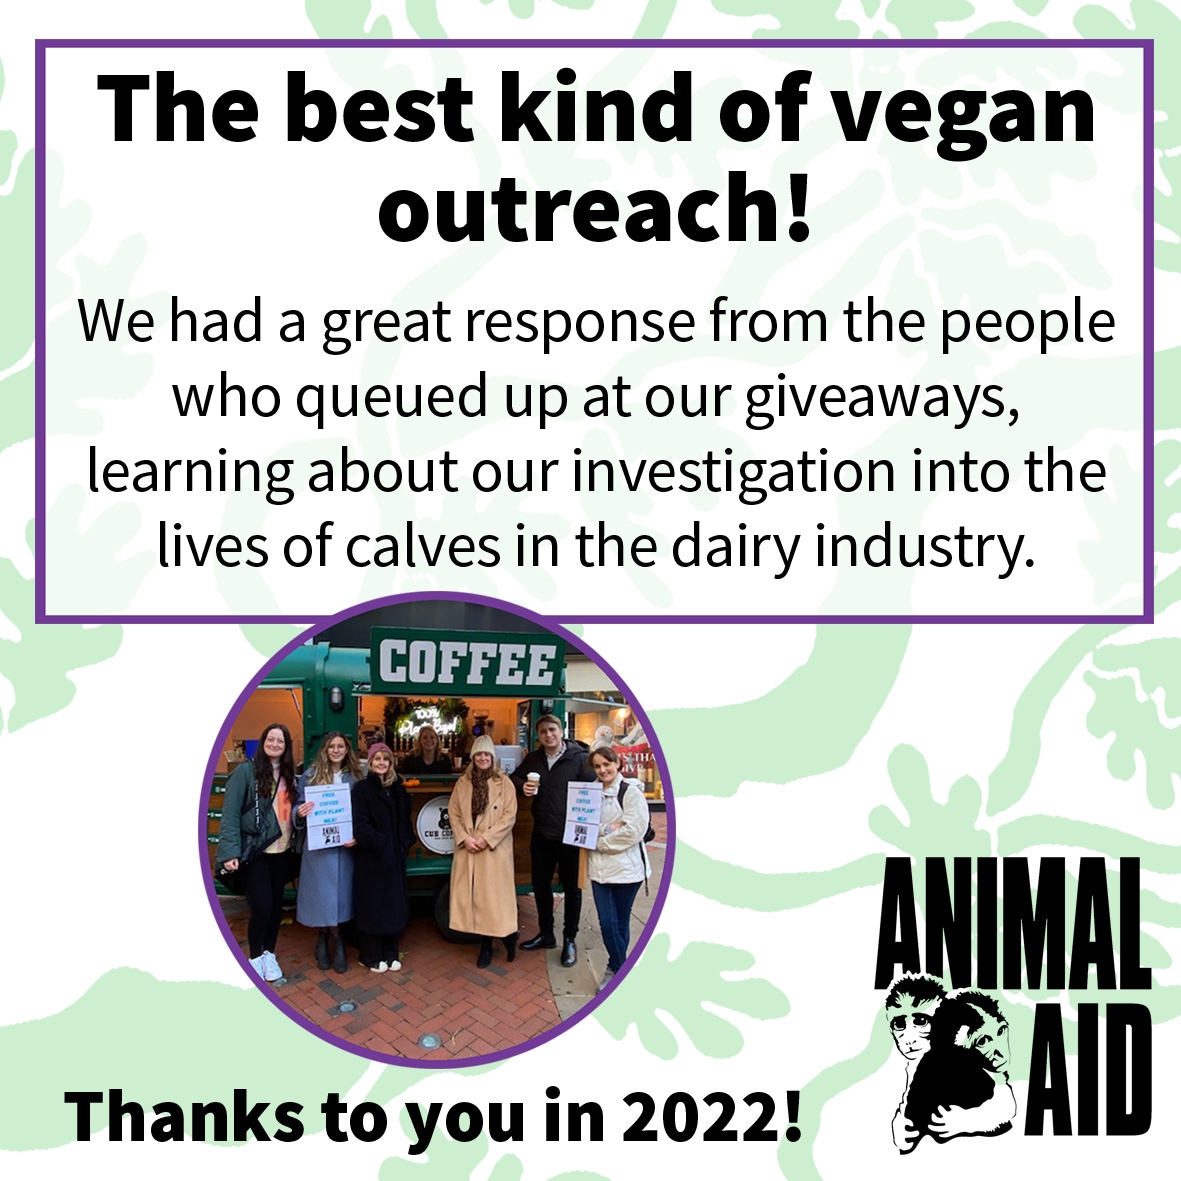 ✨Thanks to you in 2022! ✨

Most people were surprised by the routine cruelty involved in producing milk, as found by our investigations.

#Vegan #IceCream #Coffee #PlantMilk #PlantBasedMilk #VeganIceCream #Vegans #Veganuary #DairyIsScary #DitchDairy #LoveAnimals #LiveKind